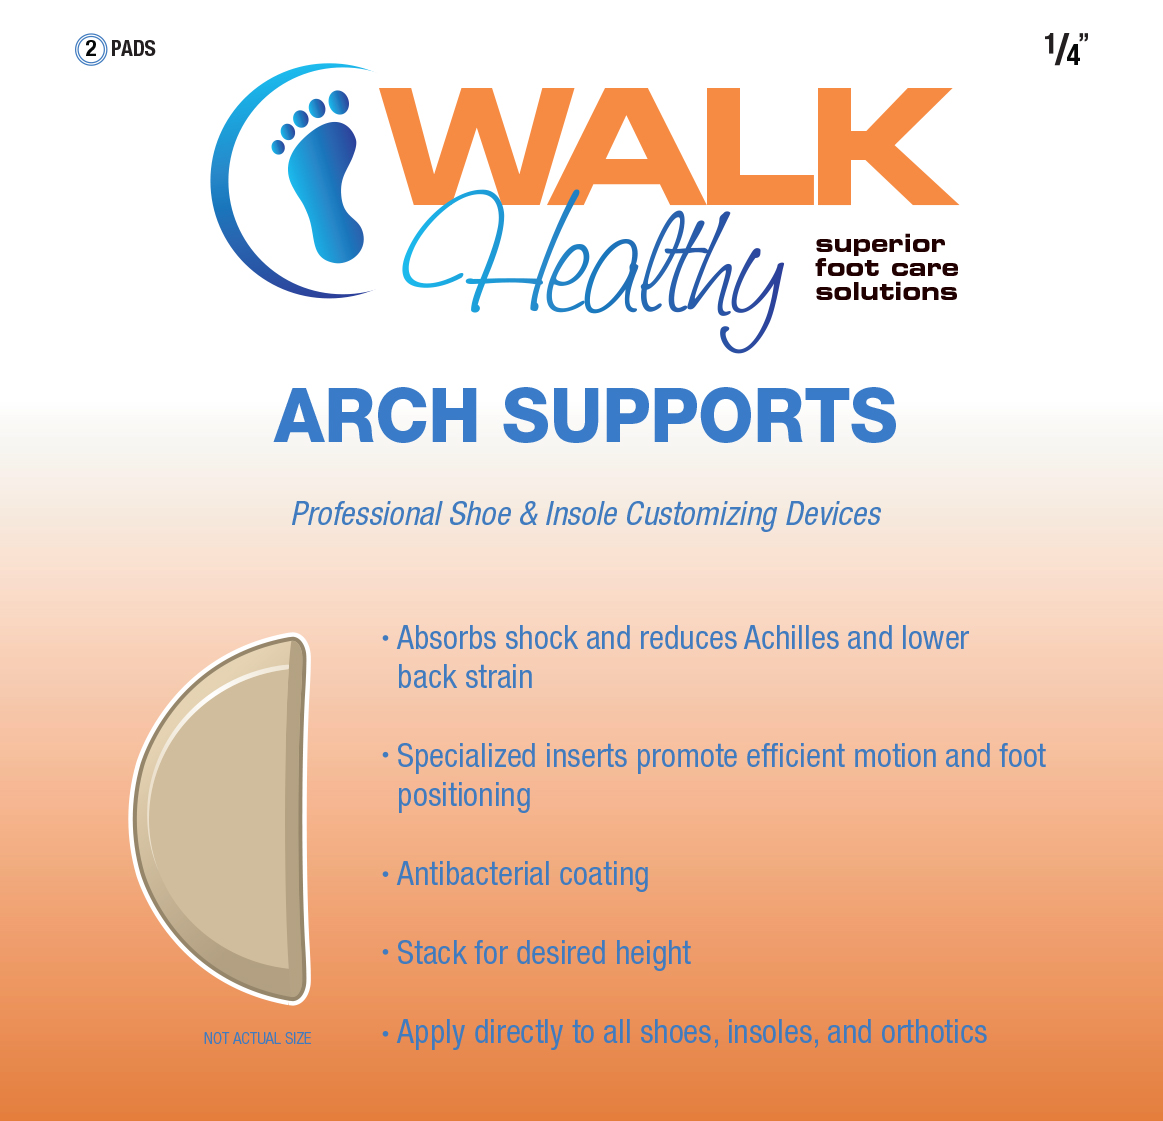 https://www.walkhealthy.com/wp-content/uploads/2019/01/WH-Tag-Arch-Supports-One-Fourth-1.jpg